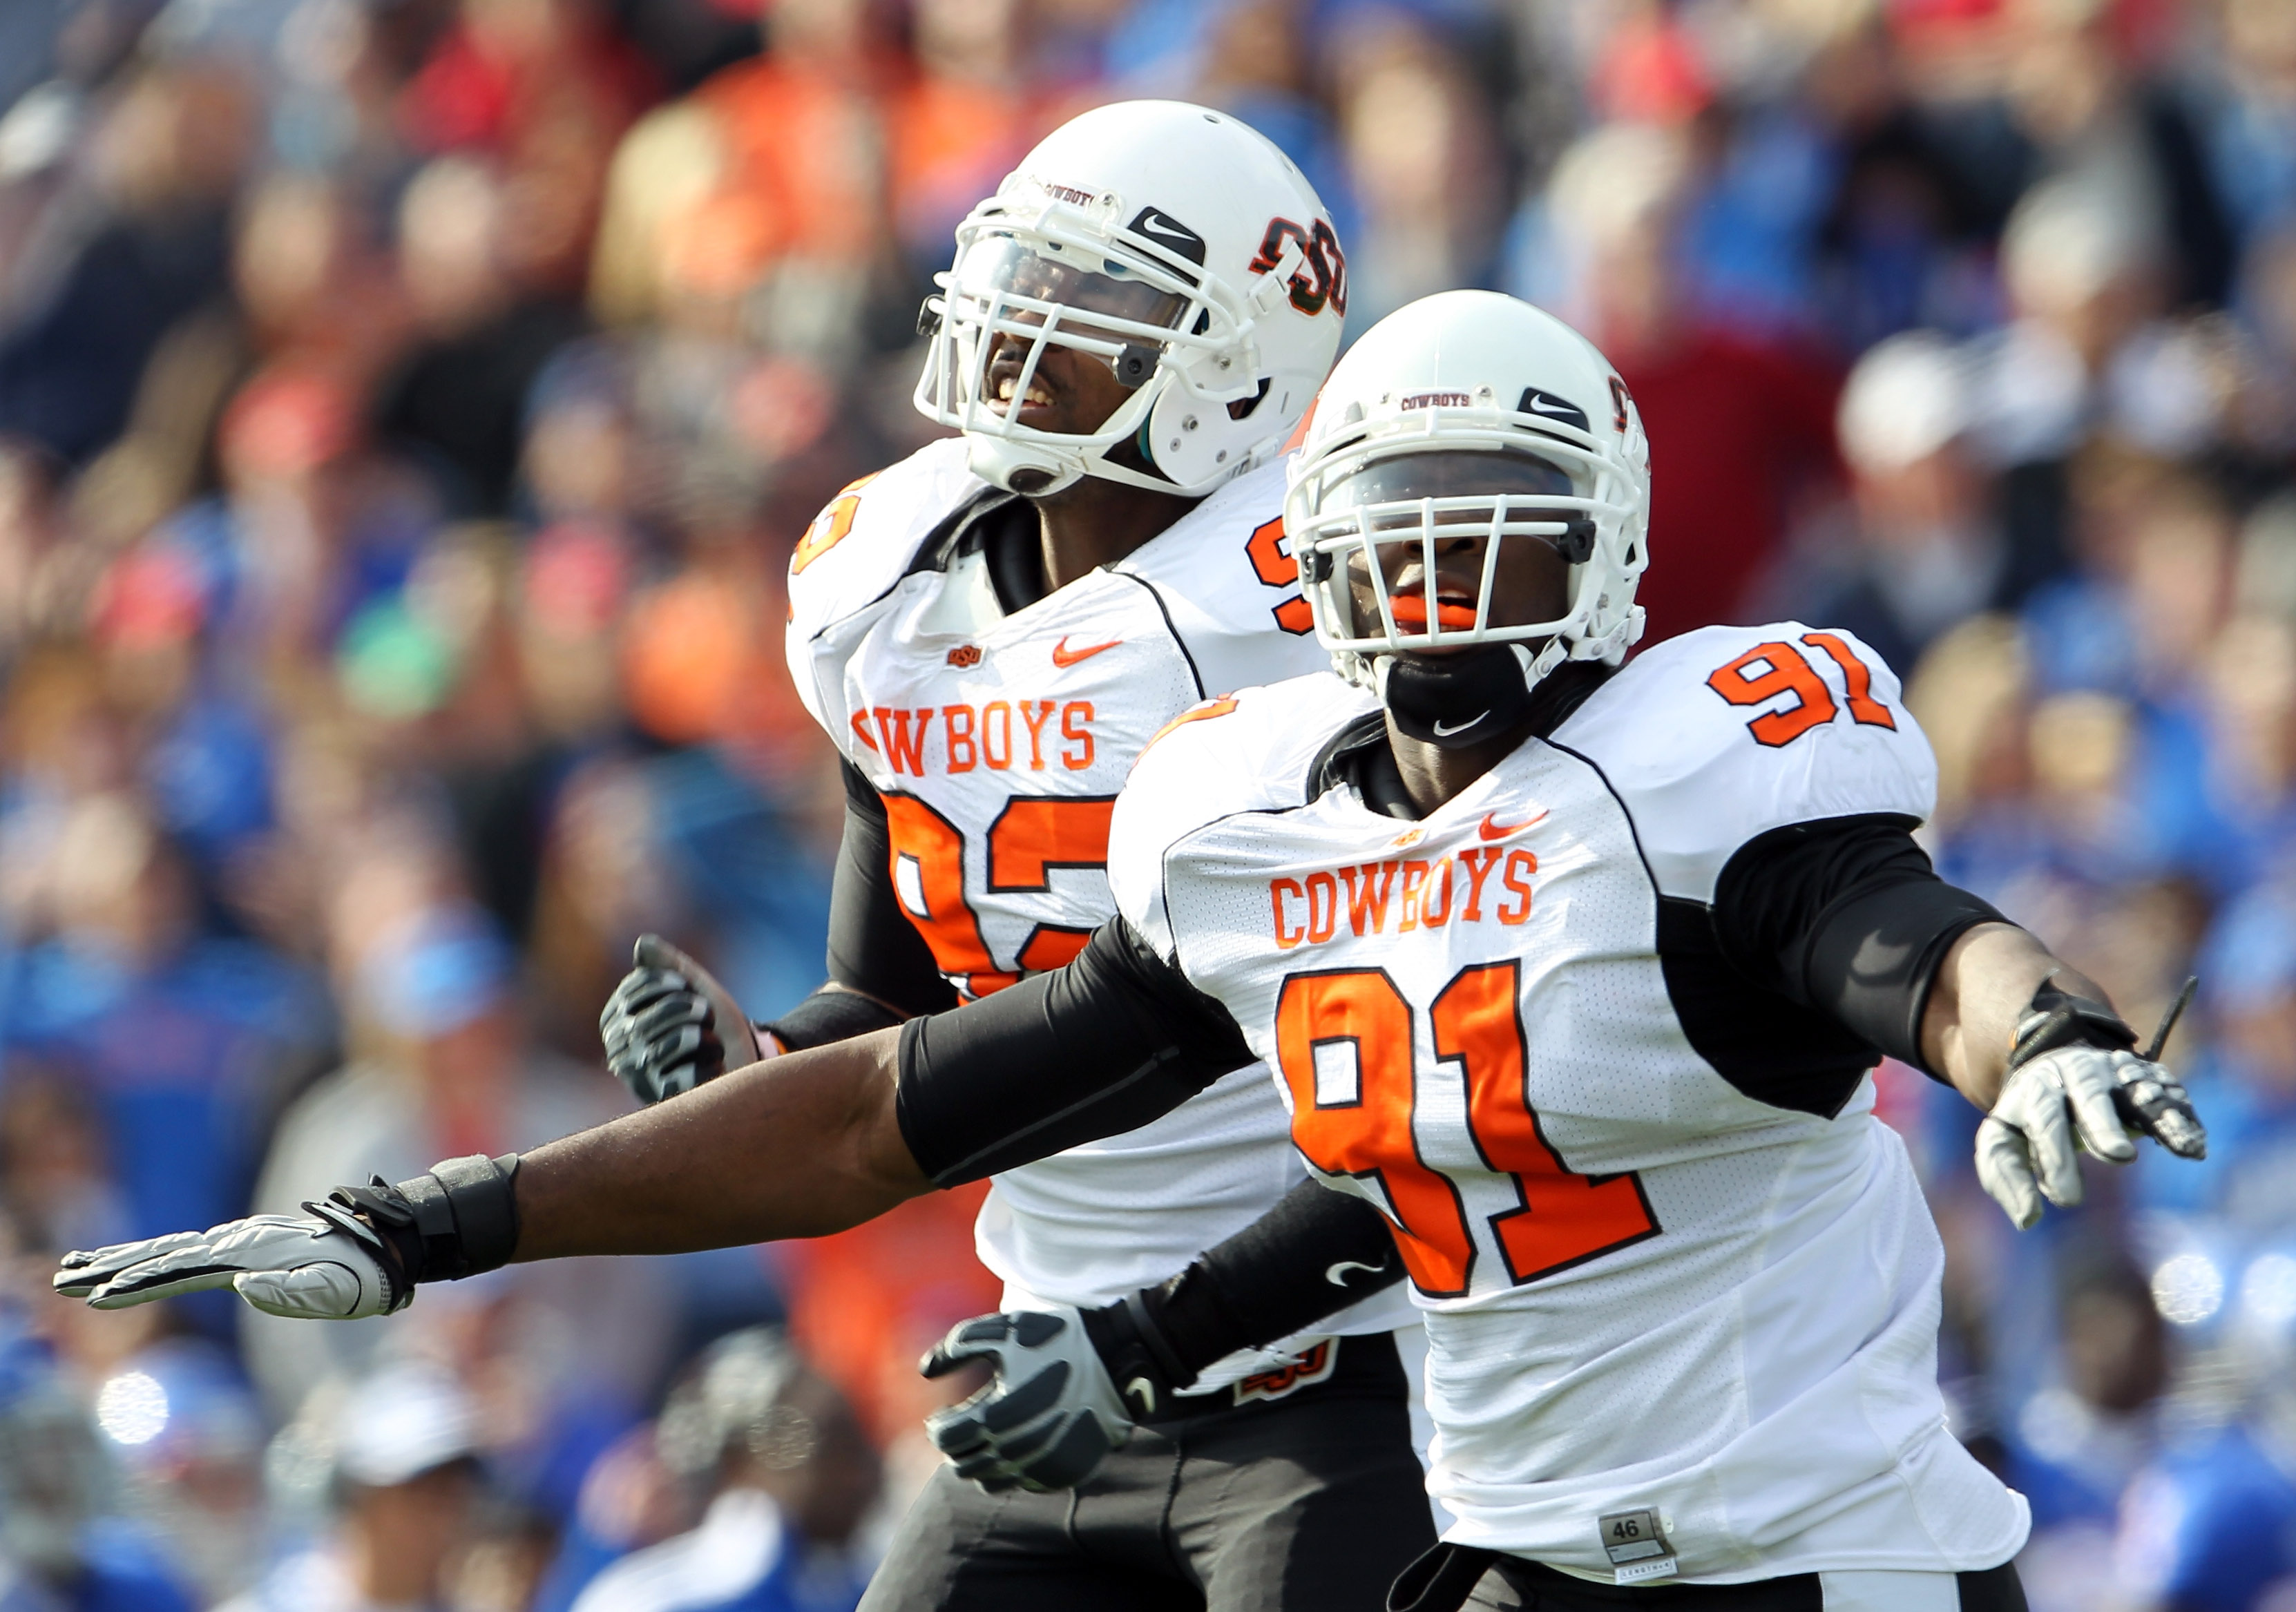 LAWRENCE, KS - NOVEMBER 20:  Ugo Chinasa #91 and Darius Hart #92 of the Oklahoma State Cowboys celebrate after the Cowboys stopped the Kansas Jayhawks from scoring at the goal line during the game on November 20, 2010 at Memorial Stadium in Lawrence, Kans